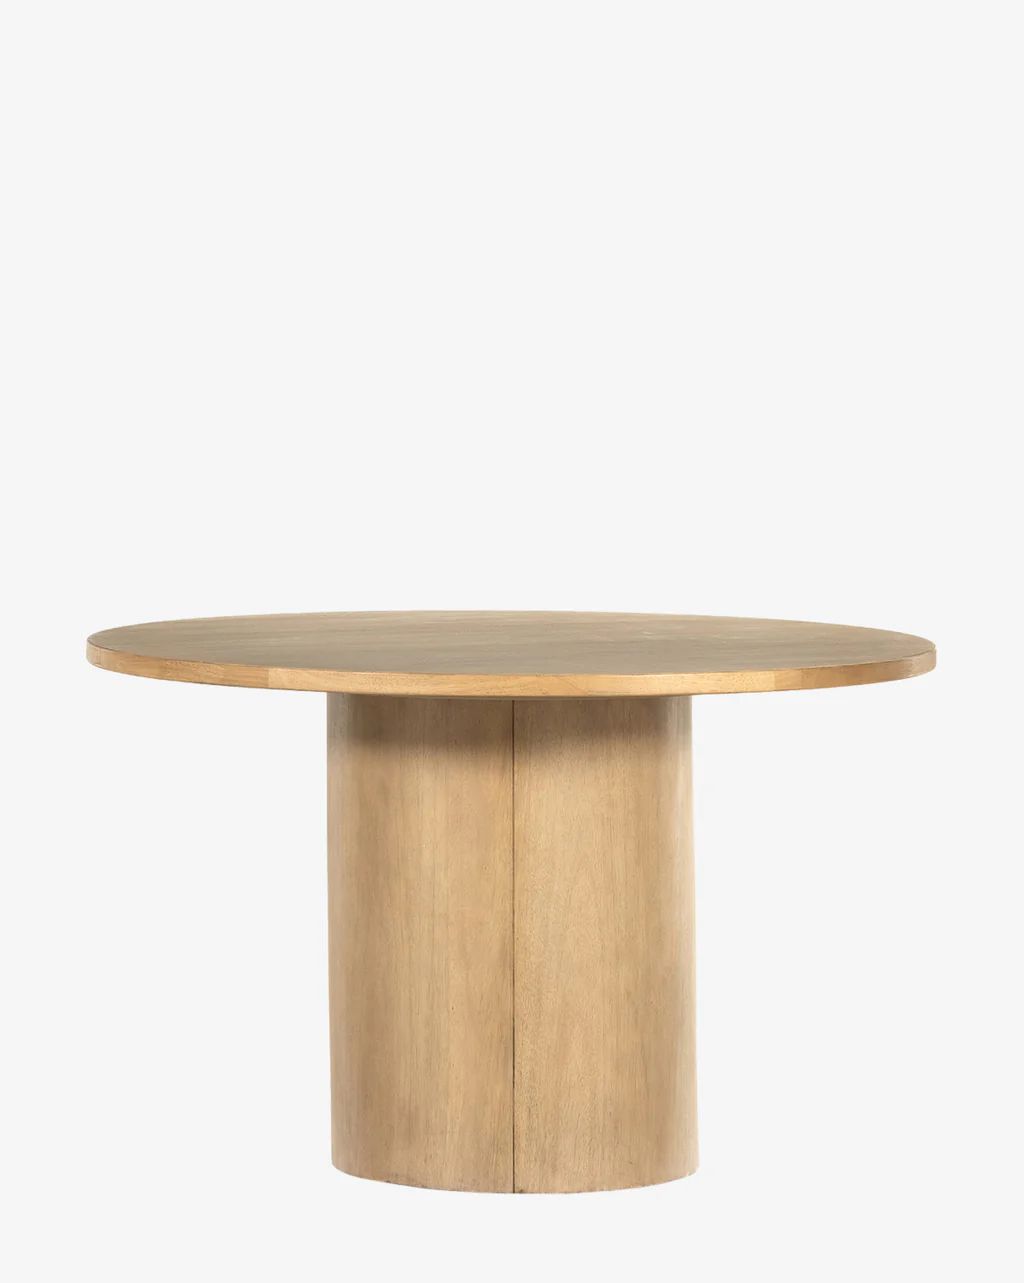 Nettal Dining Table | McGee & Co.